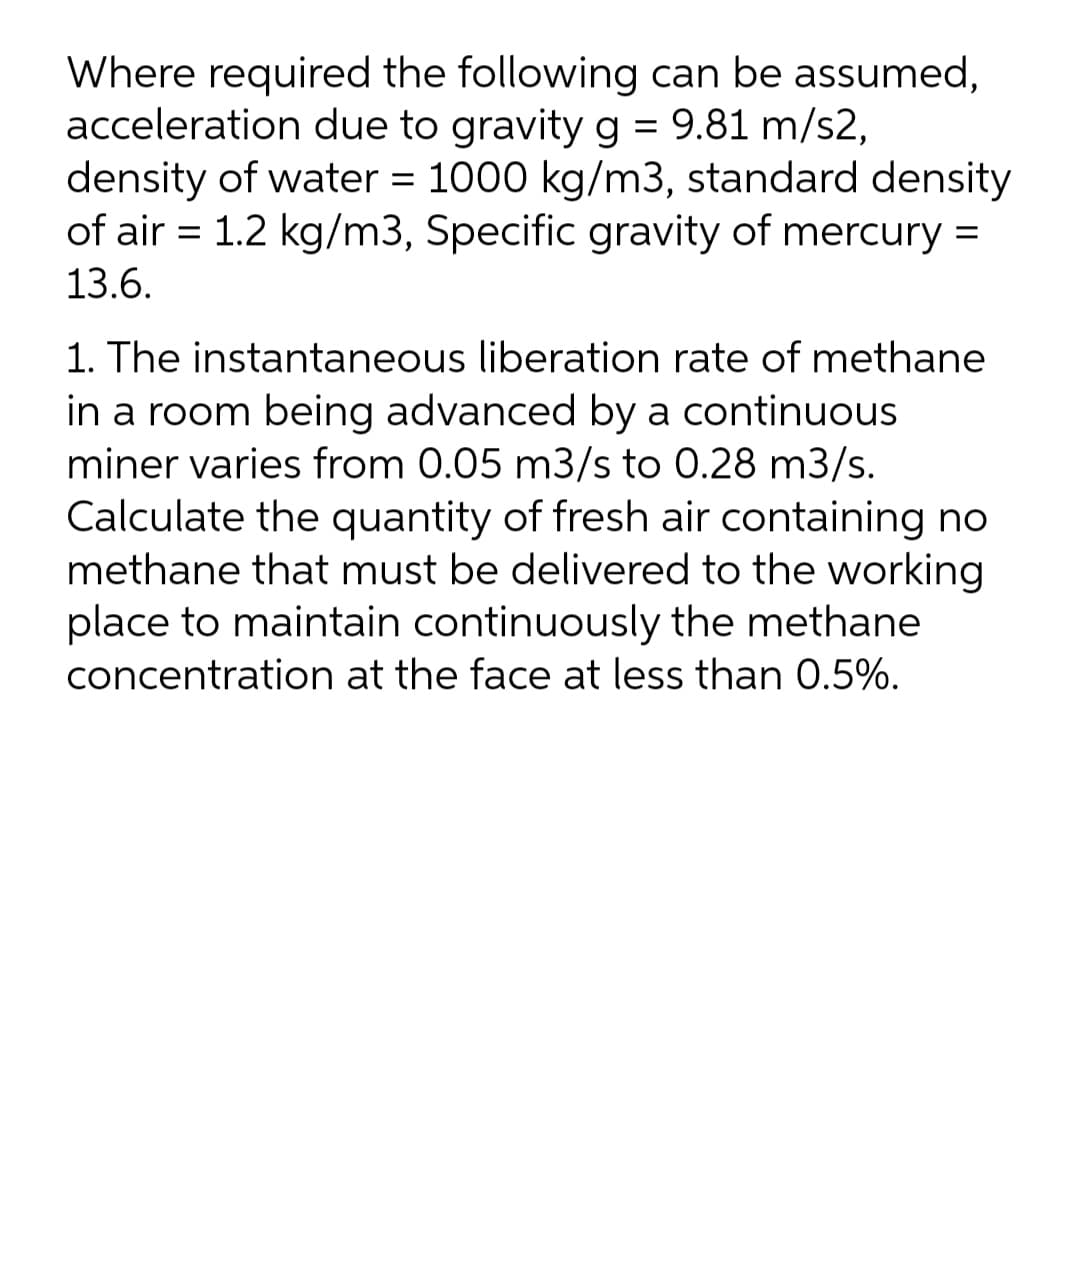 Where required the following can be assumed,
acceleration due to gravity g = 9.81 m/s2,
density of water = 1000 kg/m3, standard density
of air = 1.2 kg/m3, Specific gravity of mercury =
%3D
13.6.
1. The instantaneous liberation rate of methane
in a room being advanced by a continuous
miner varies from 0.05 m3/s to 0.28 m3/s.
Calculate the quantity of fresh air containing no
methane that must be delivered to the working
place to maintain continuously the methane
concentration at the face at less than 0.5%.
